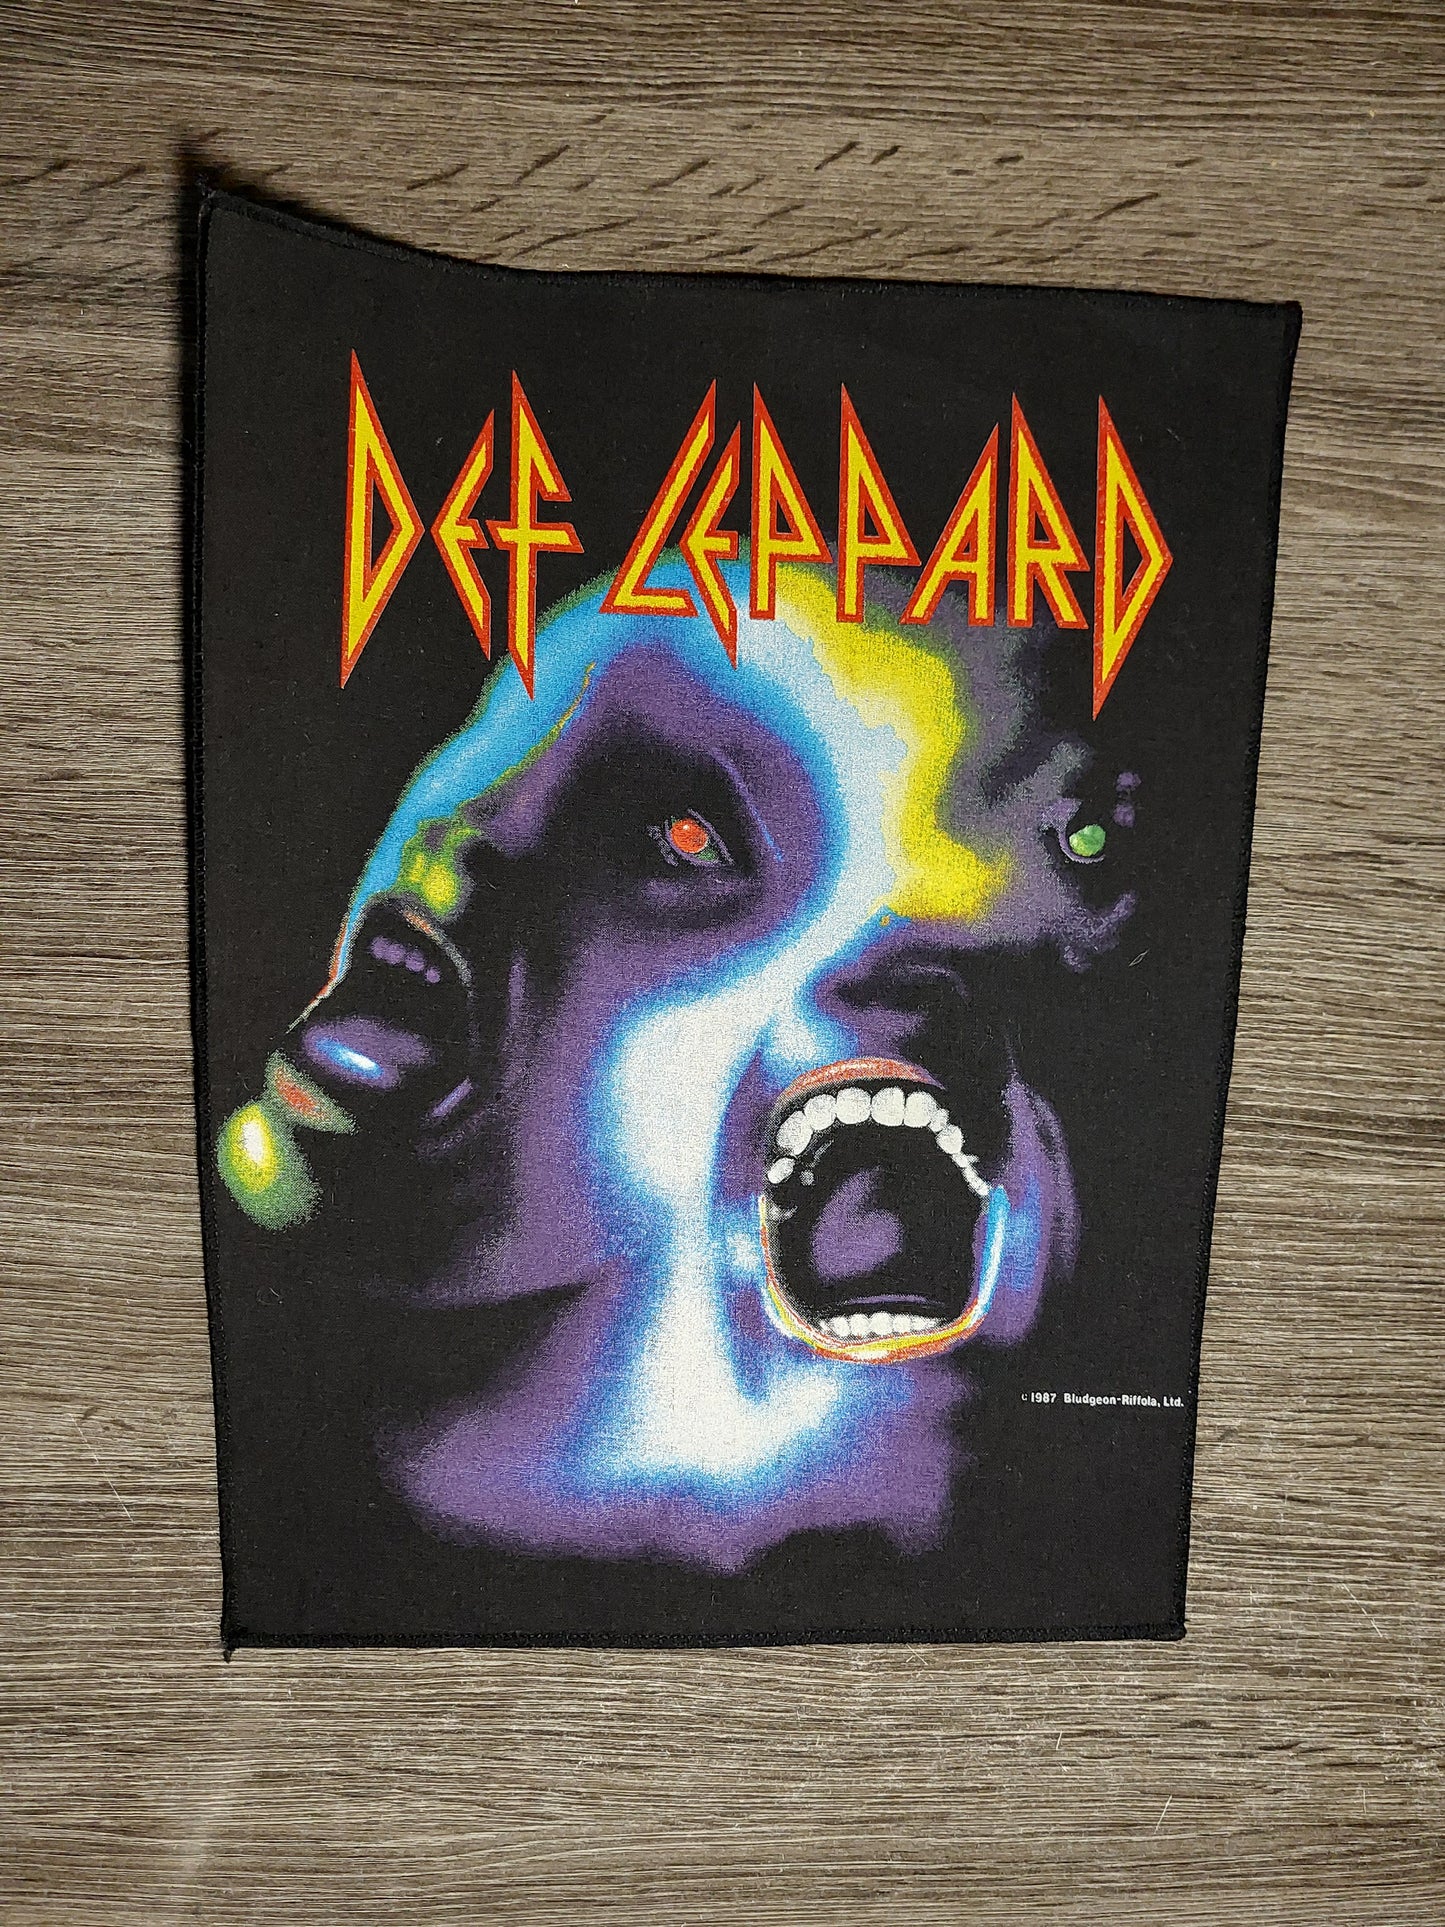 Def Leppard - Hysteria backpatch